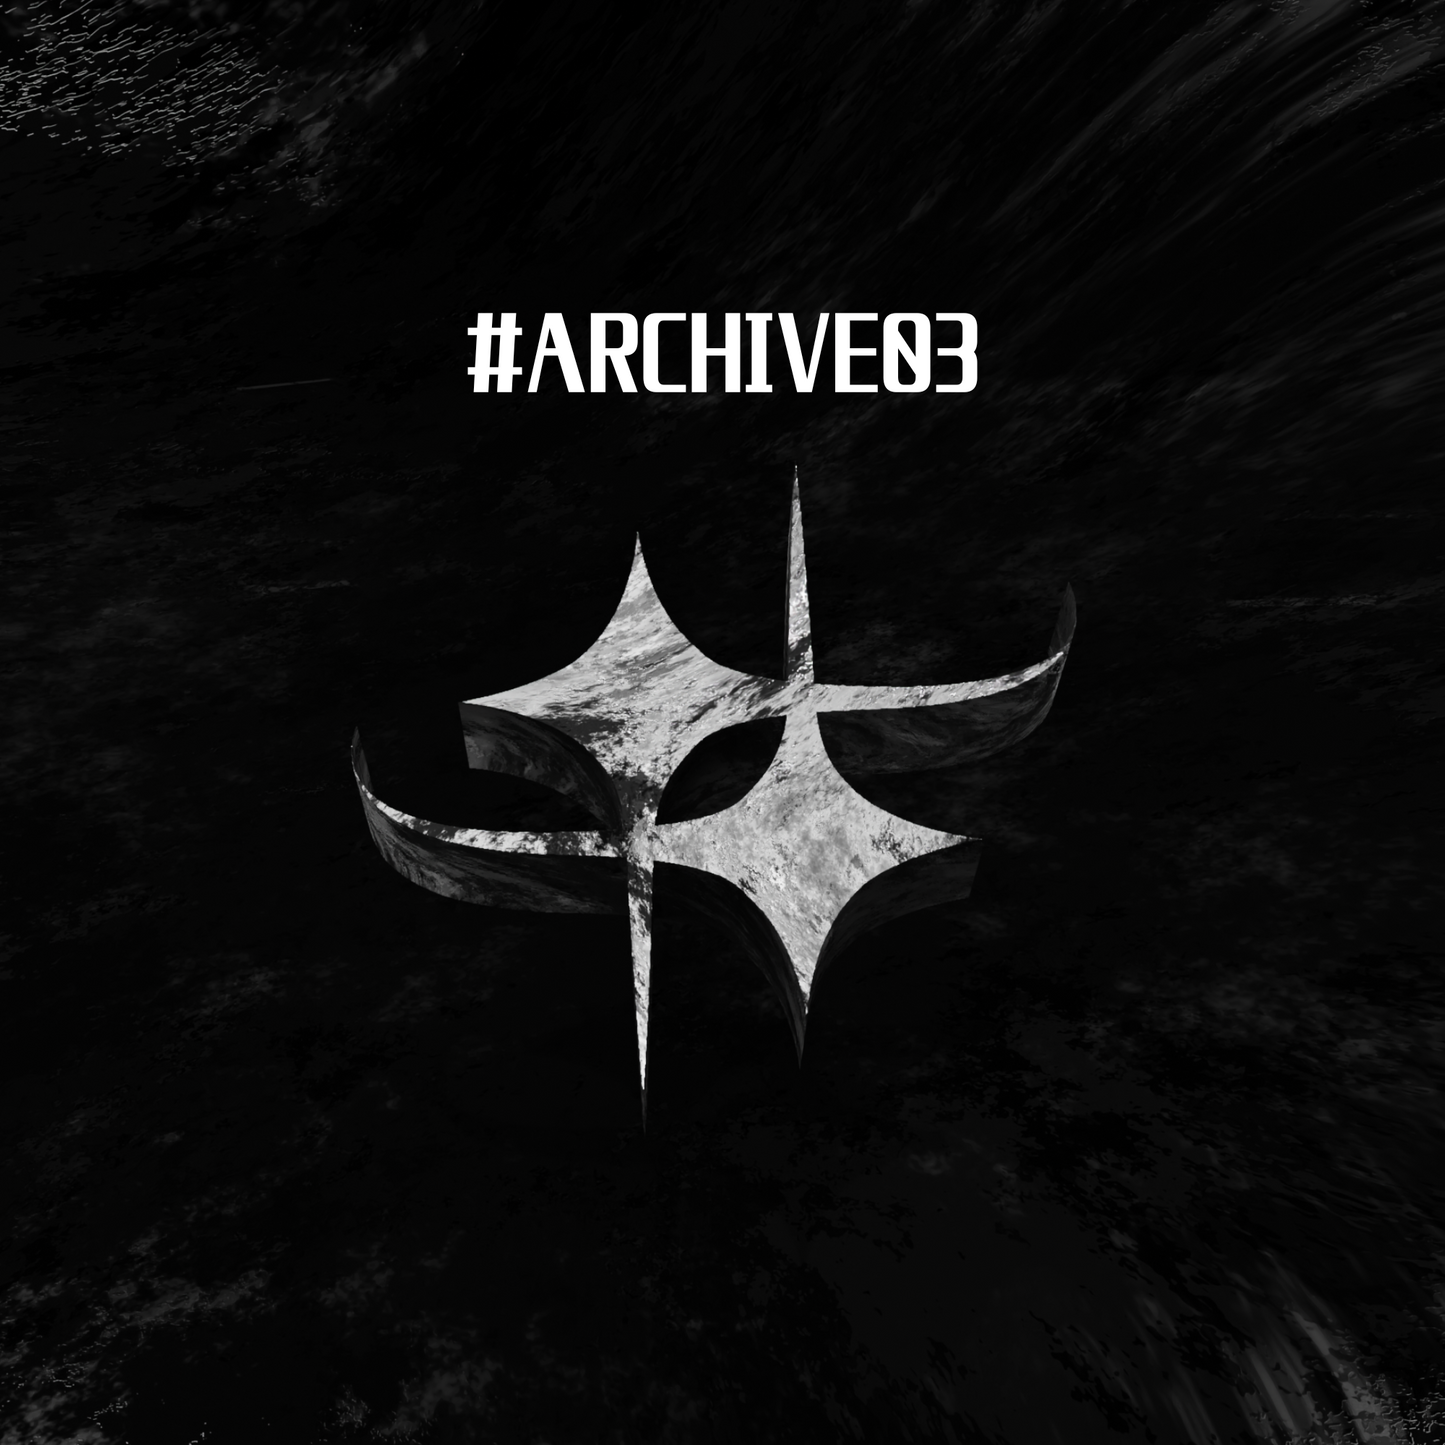 Archive03 coming this June...